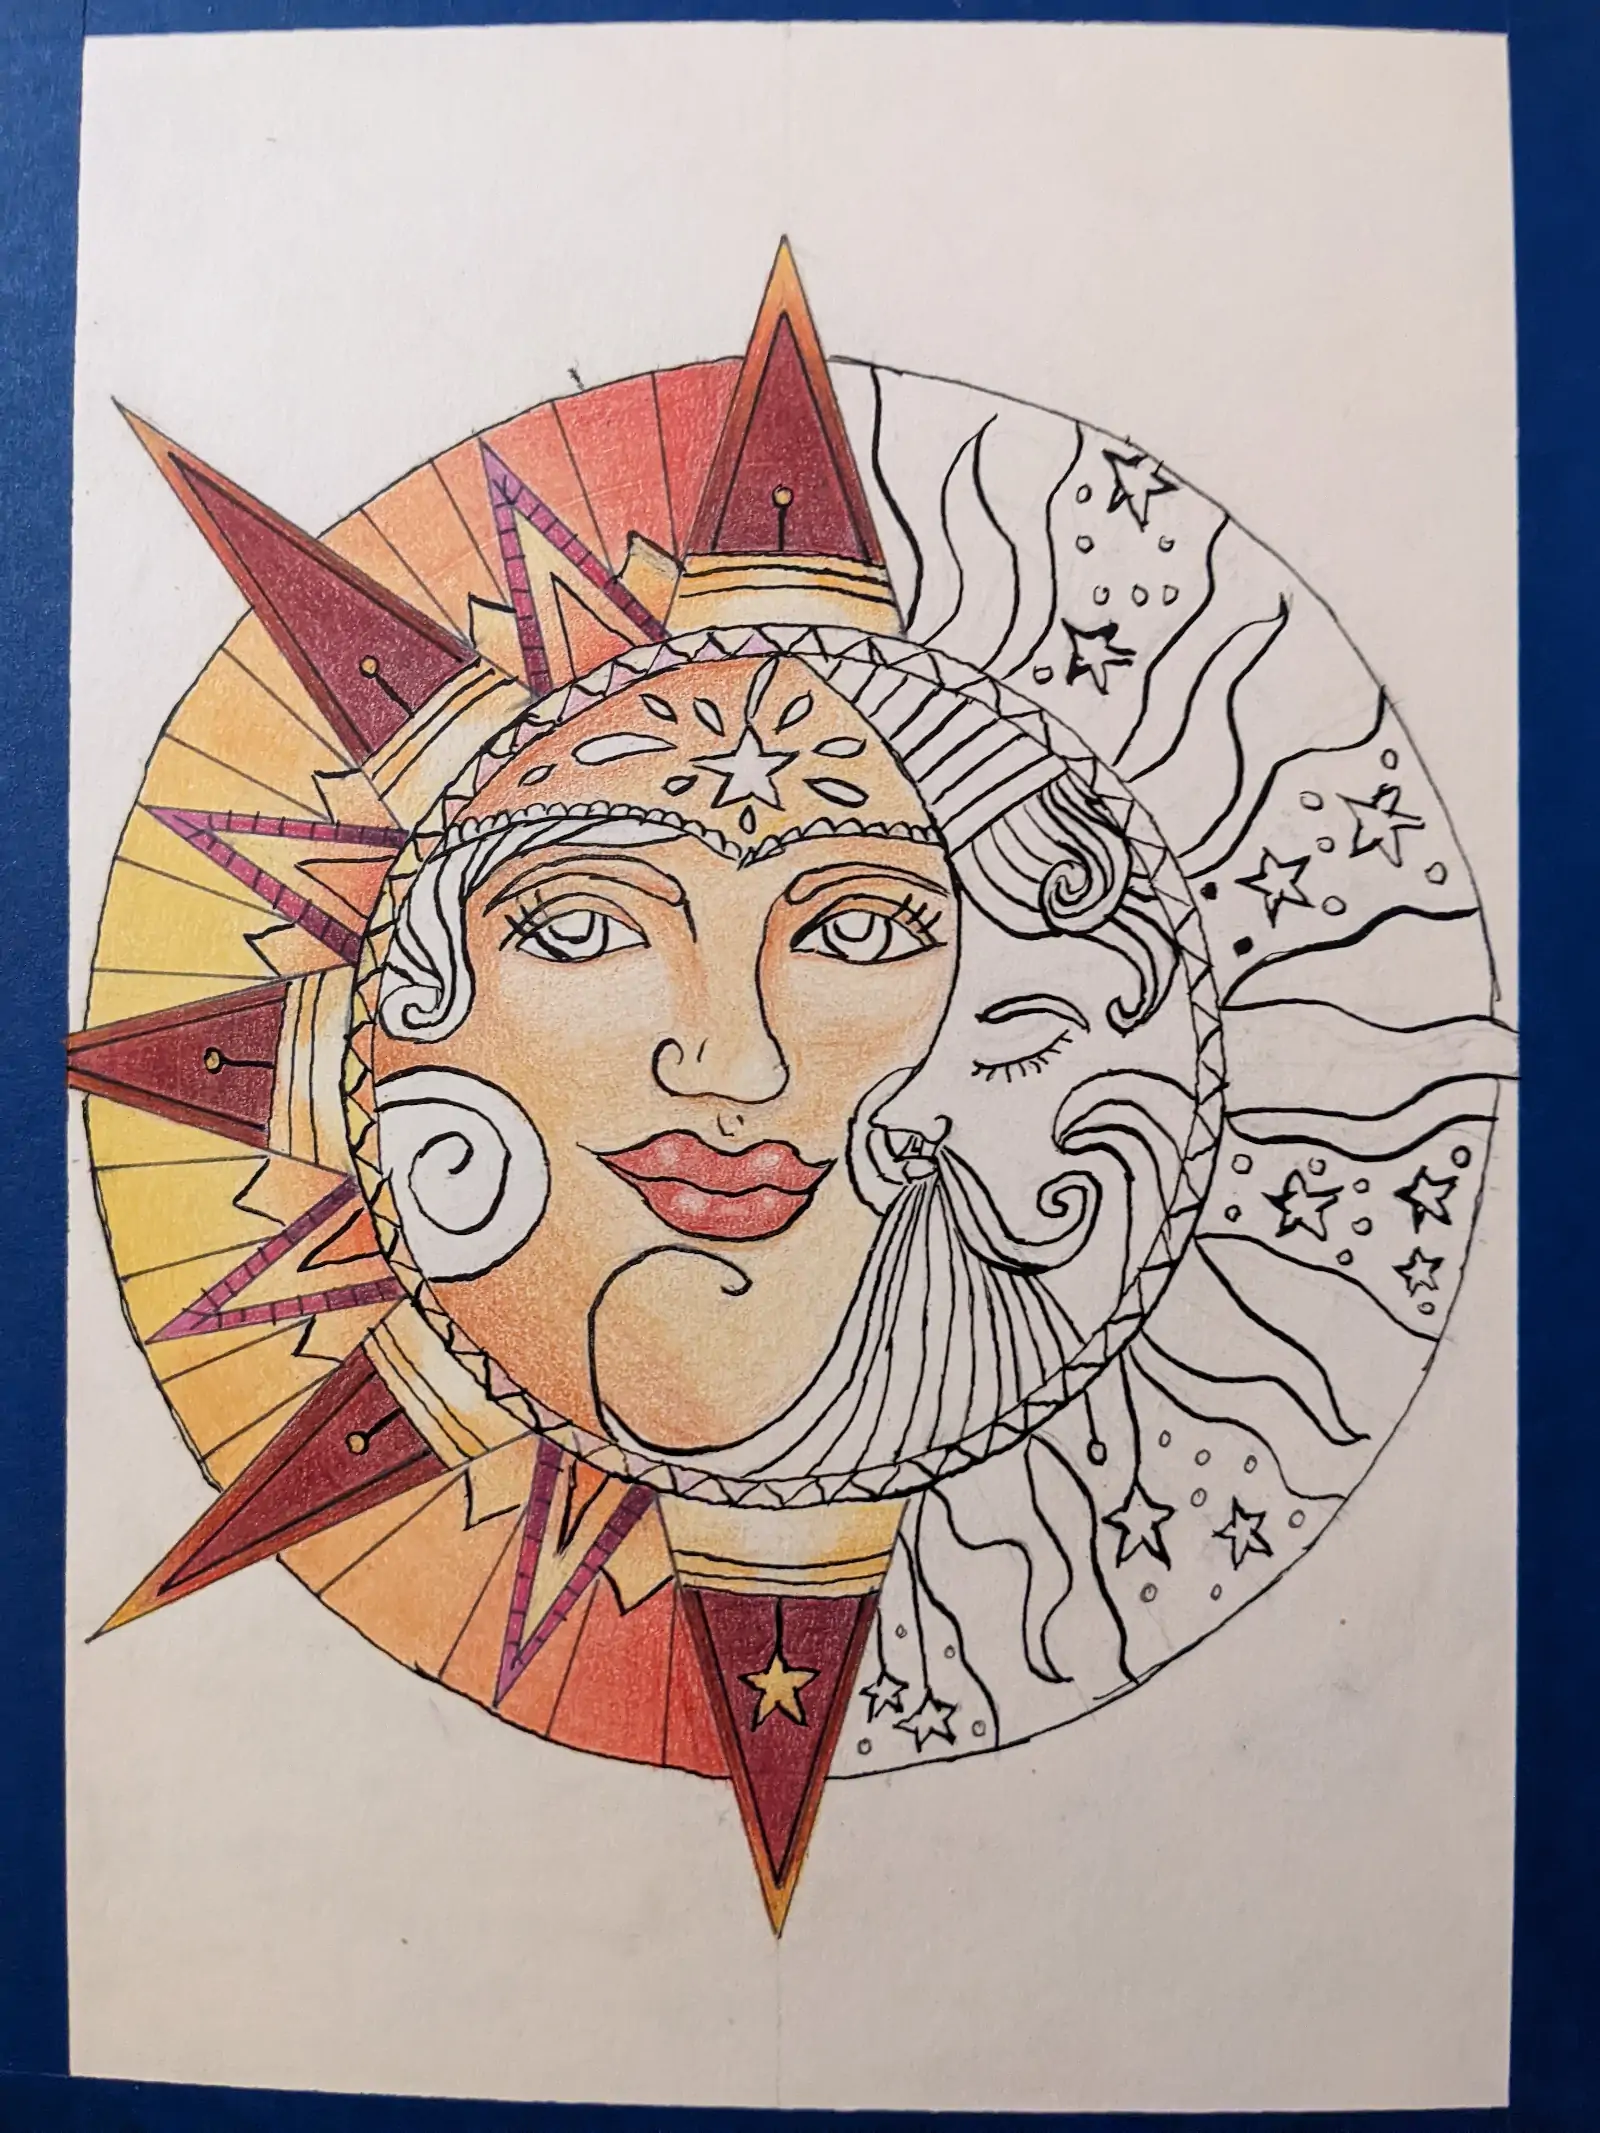 Sun and moon in yin-and-yang-style drawing. Colored ring, spikes, and sun face.